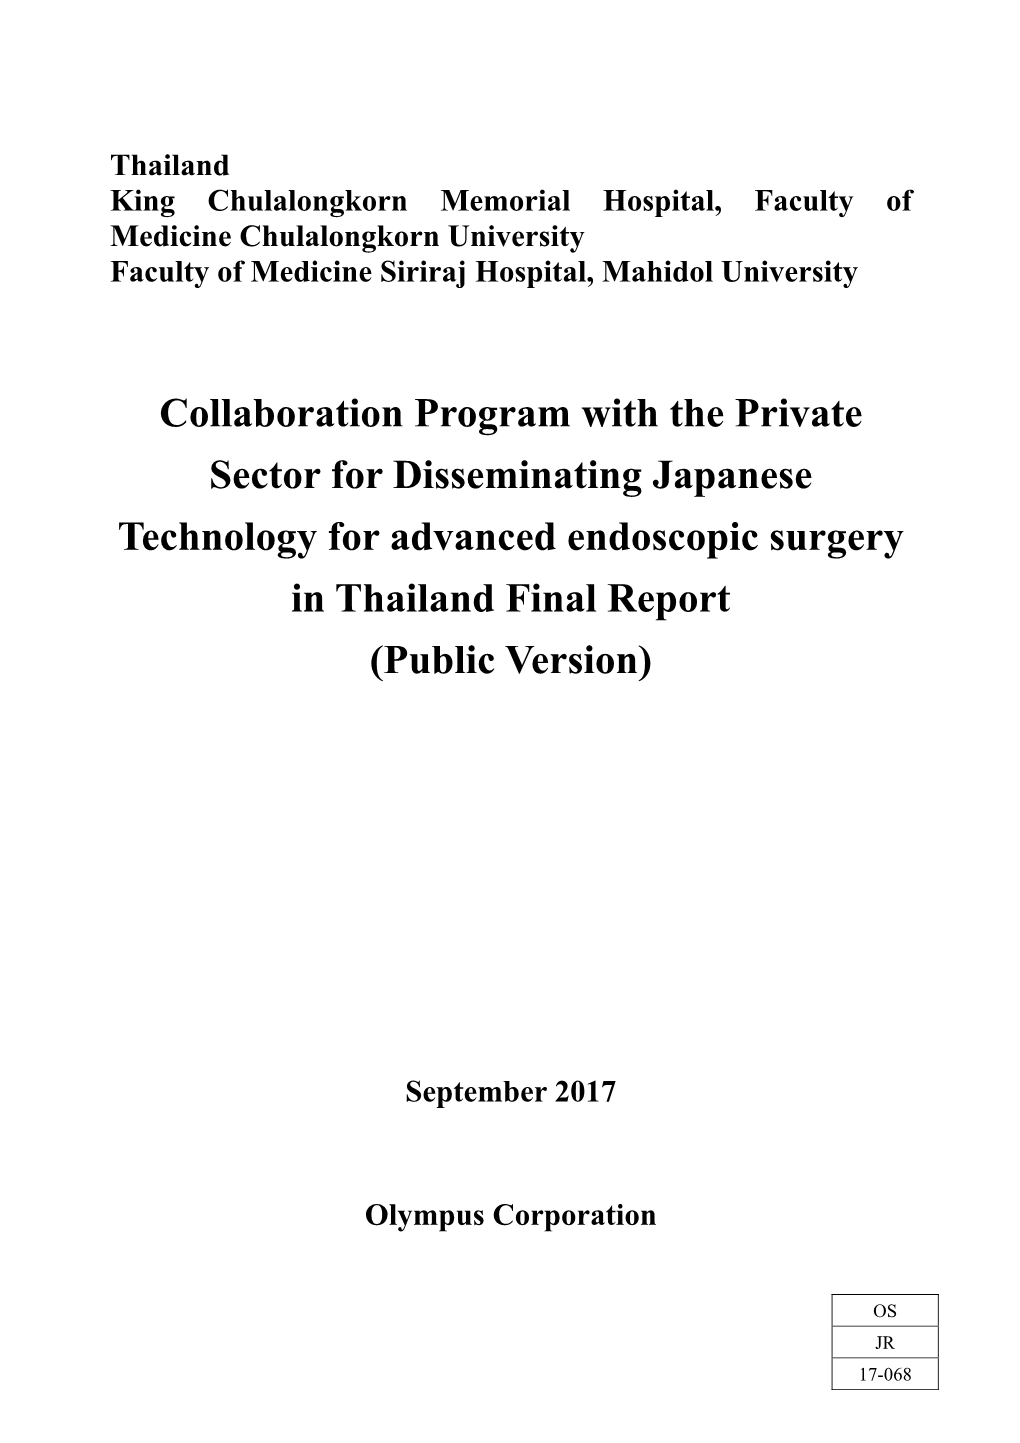 Collaboration Program with the Private Sector for Disseminating Japanese Technology for Advanced Endoscopic Surgery in Thailand Final Report (Public Version)